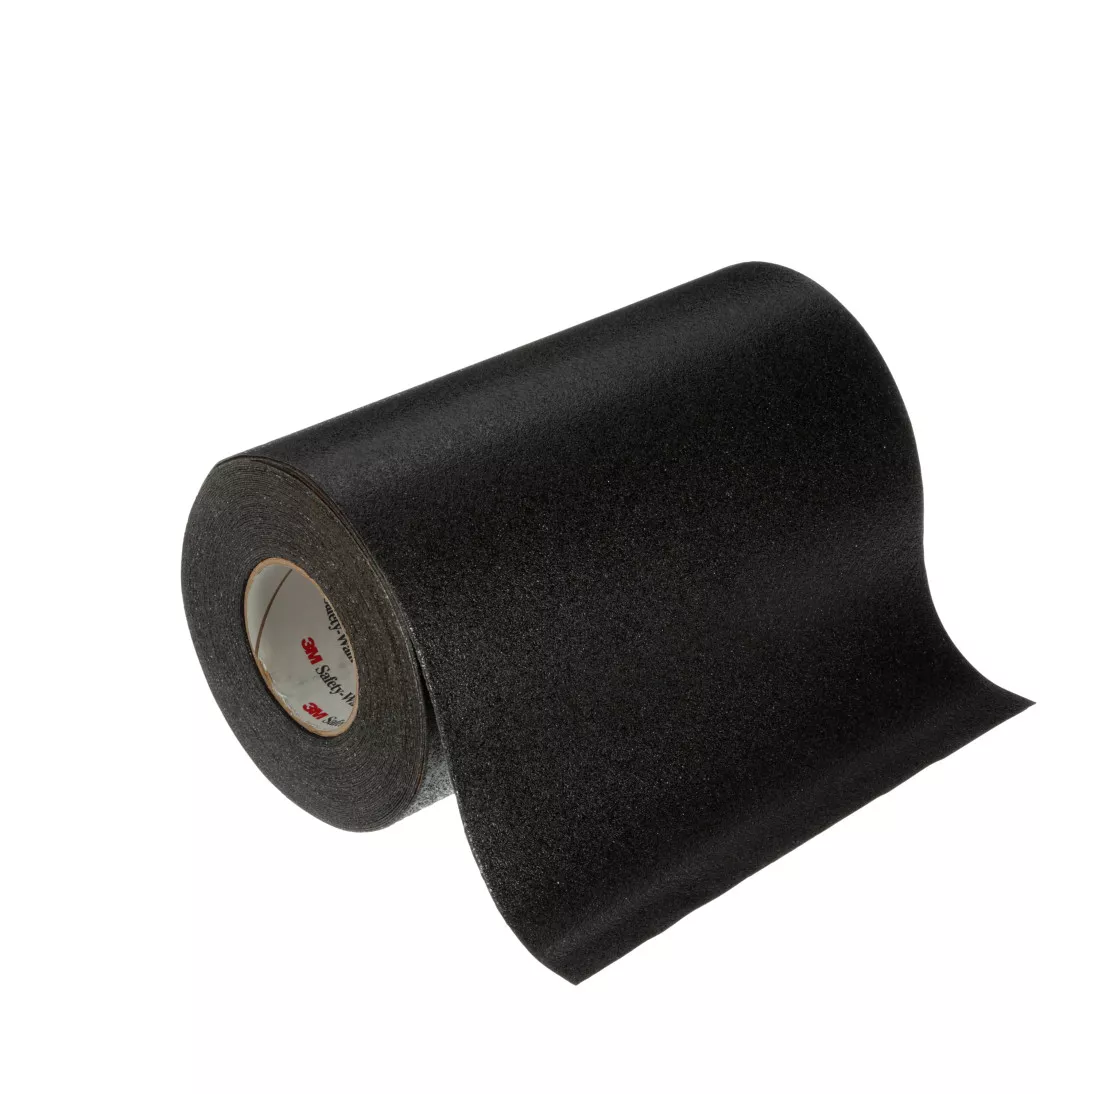 3M™ Safety-Walk™ Slip-Resistant Conformable Tapes & Treads 510, Black,
49.25 in x 120 ft, Untrimmed Jumbo Roll